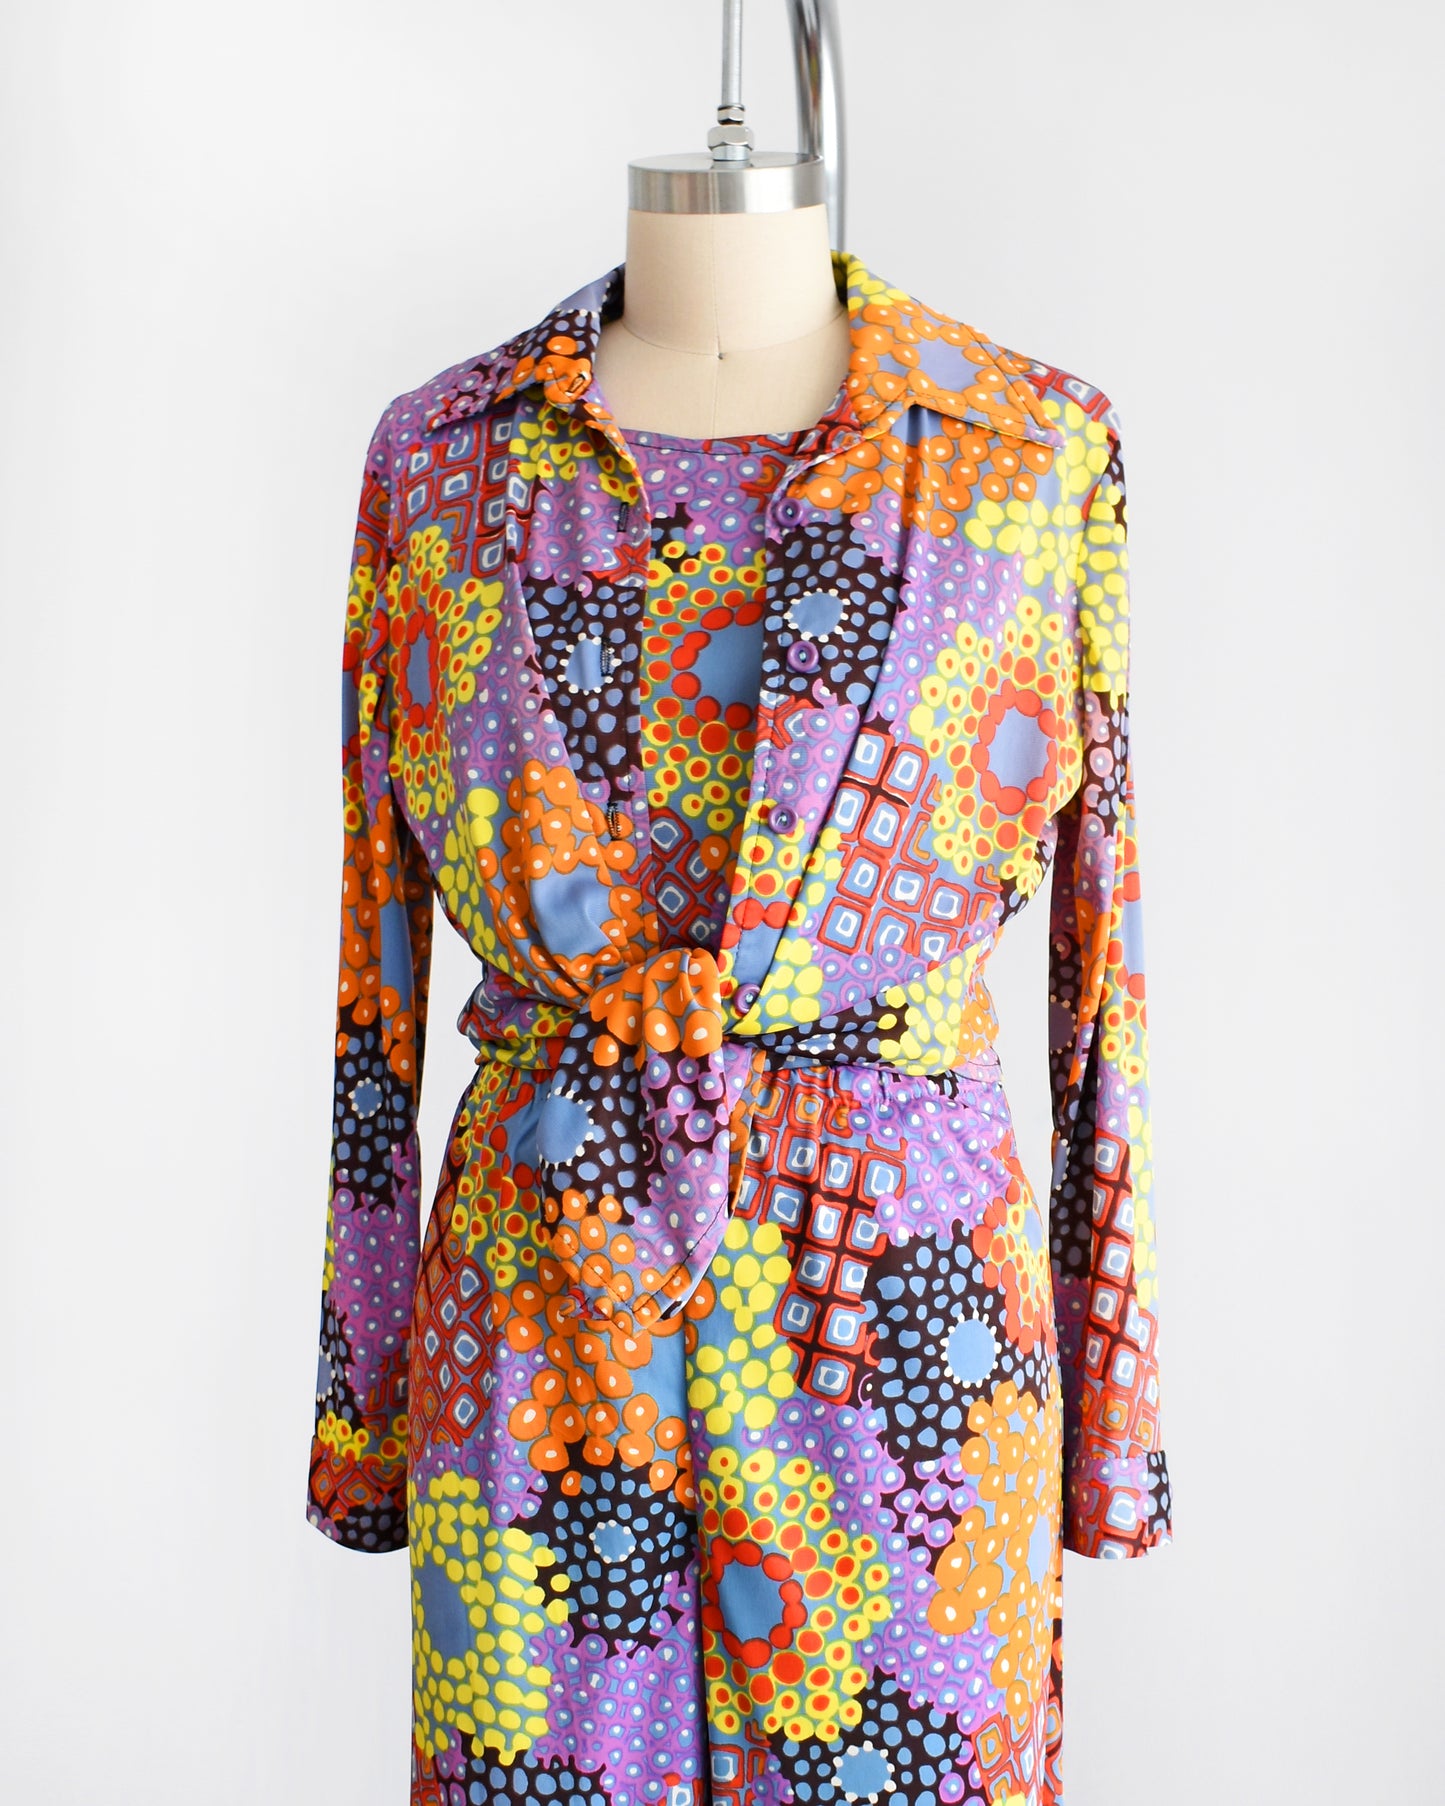 Side front view of a vibrant vintage 1970 mod floral pantsuit three piece set. The blouse is tied at the waist